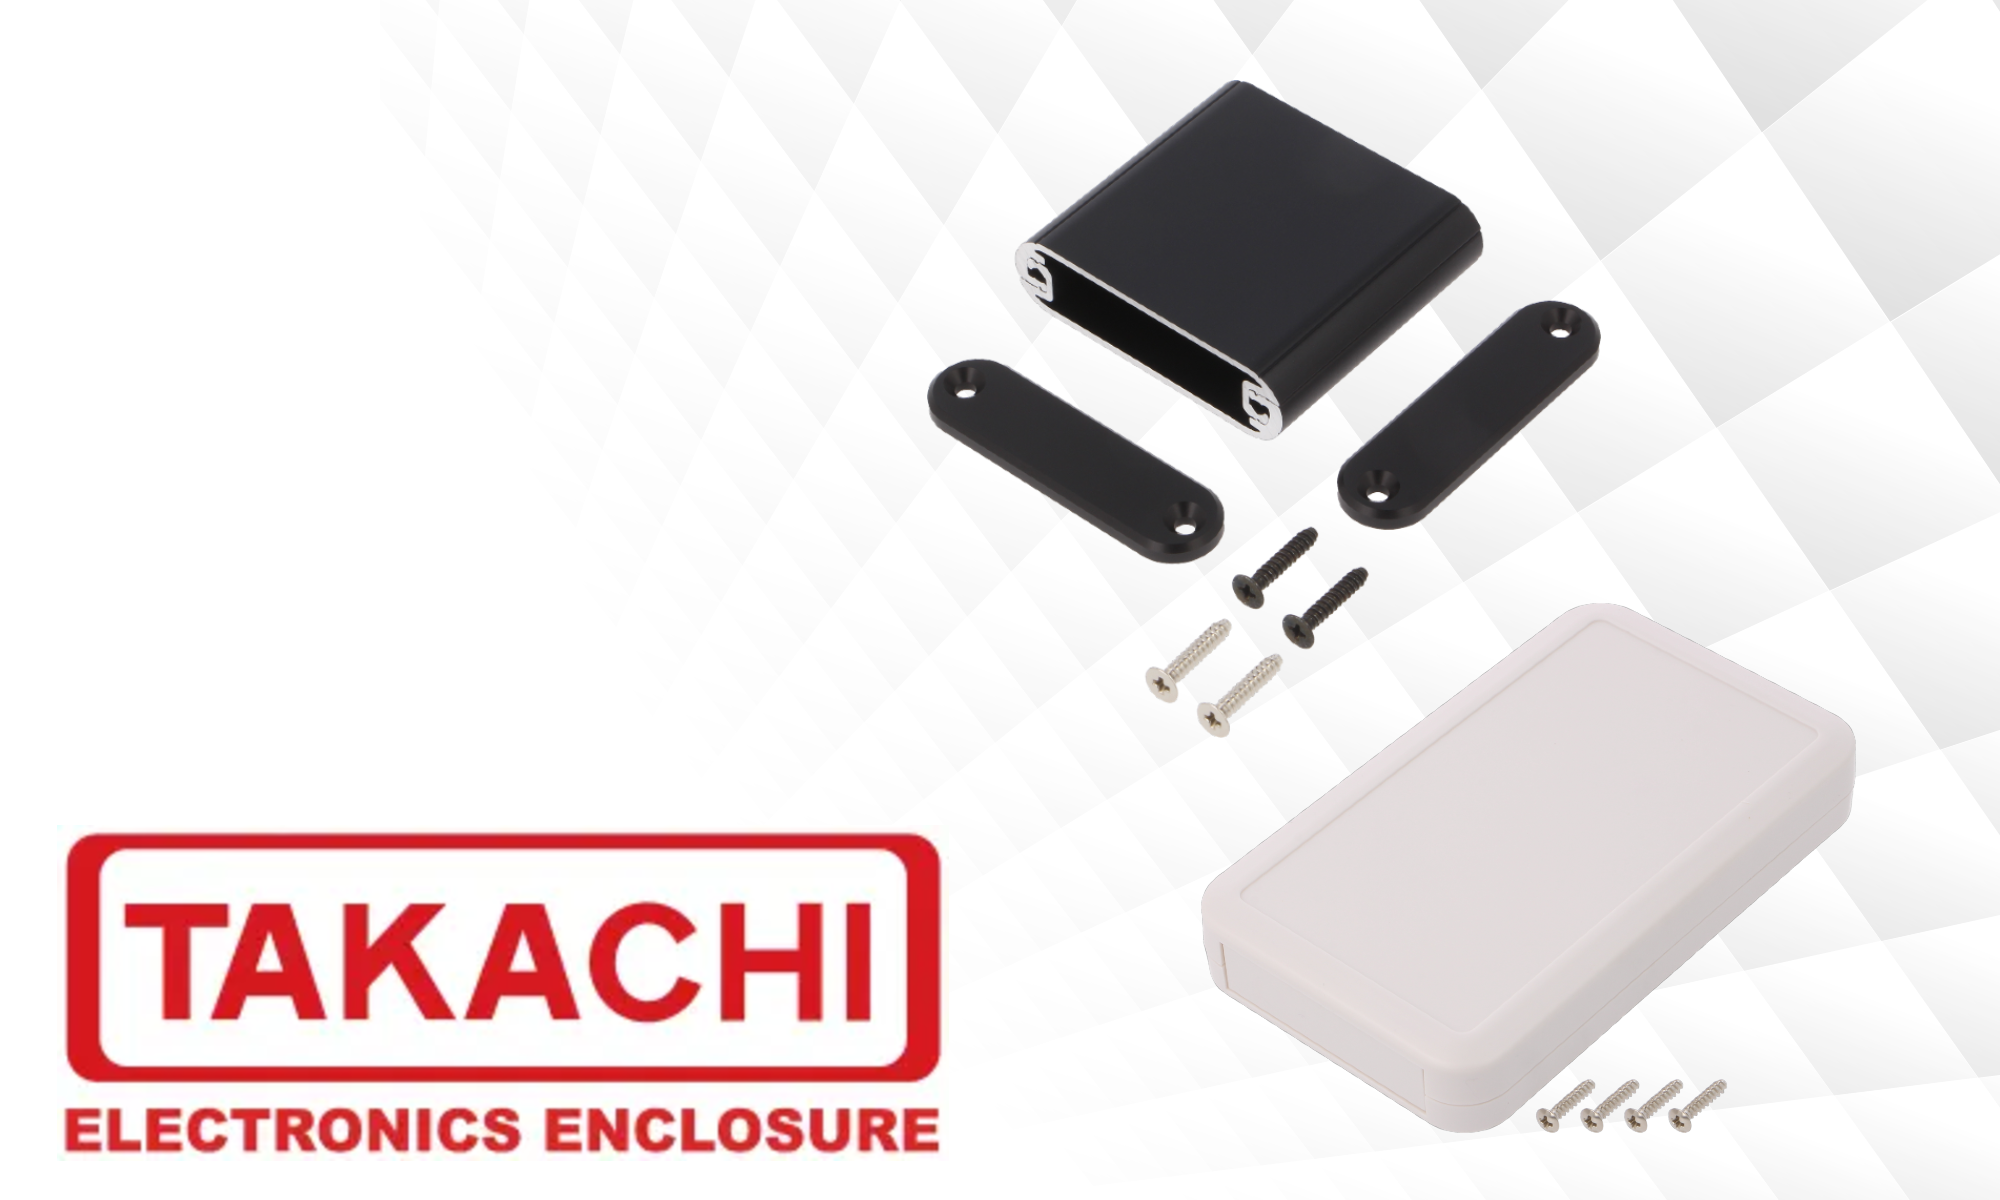 Enclosures from the Japanese manufacturer already in TME offer